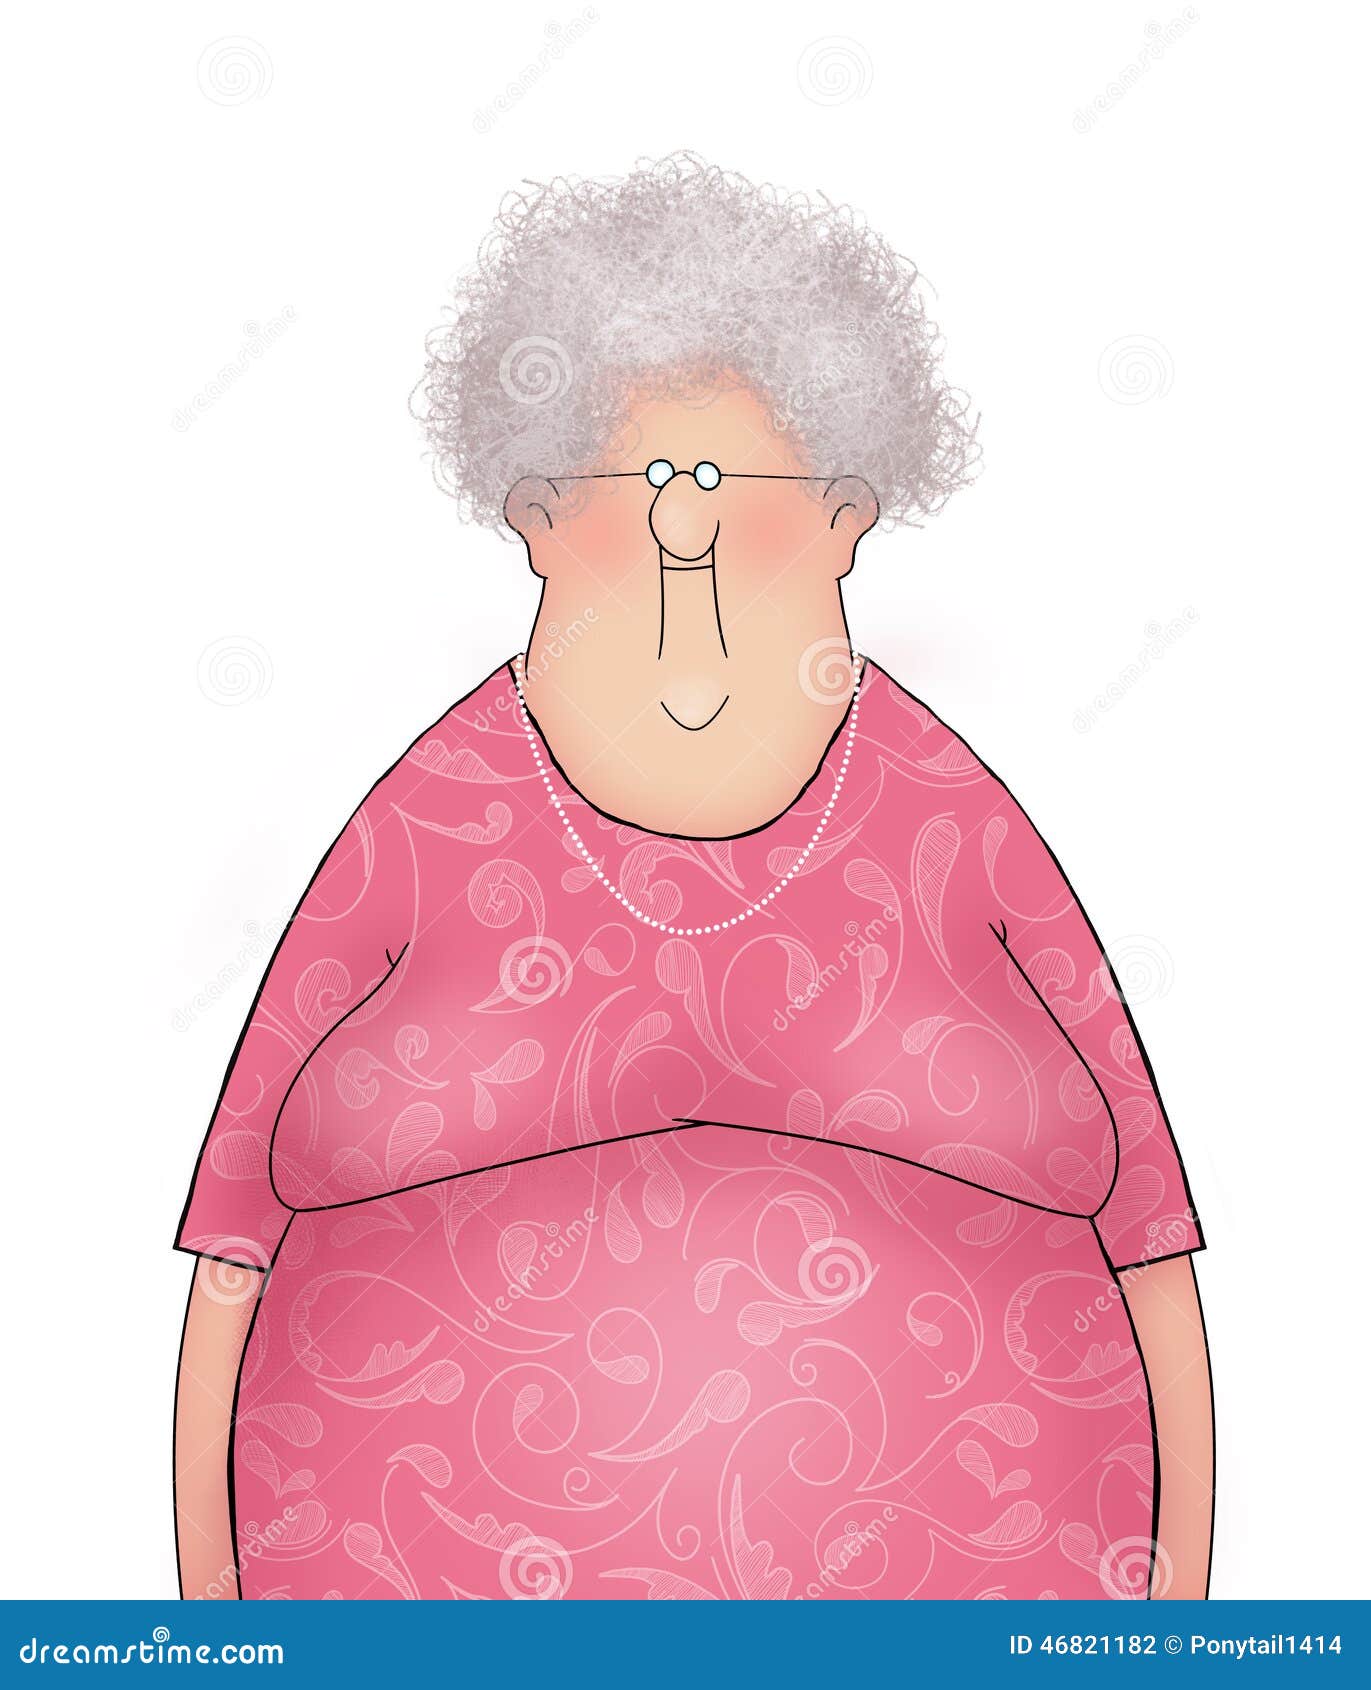 Cartoon Of A Happy Smiling Old Lady Stock Illustration - Image: 46821182